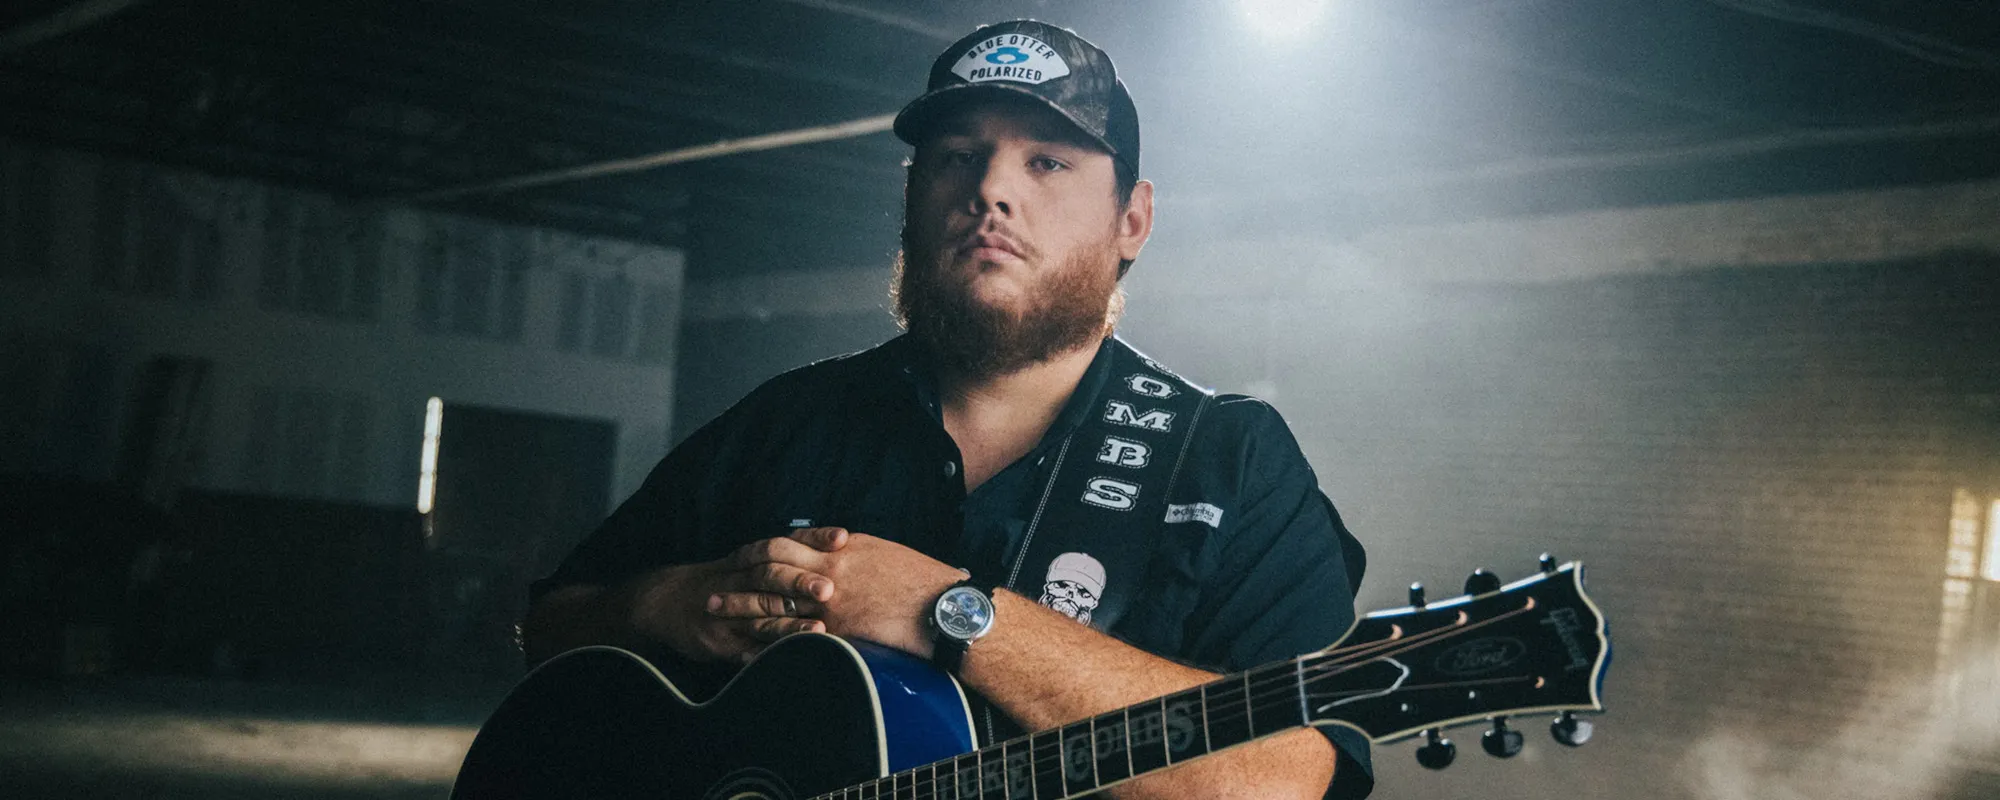 Luke Combs Makes History with Seventh No. 1 Single on ‘What You See Ain’t Always What You Get’